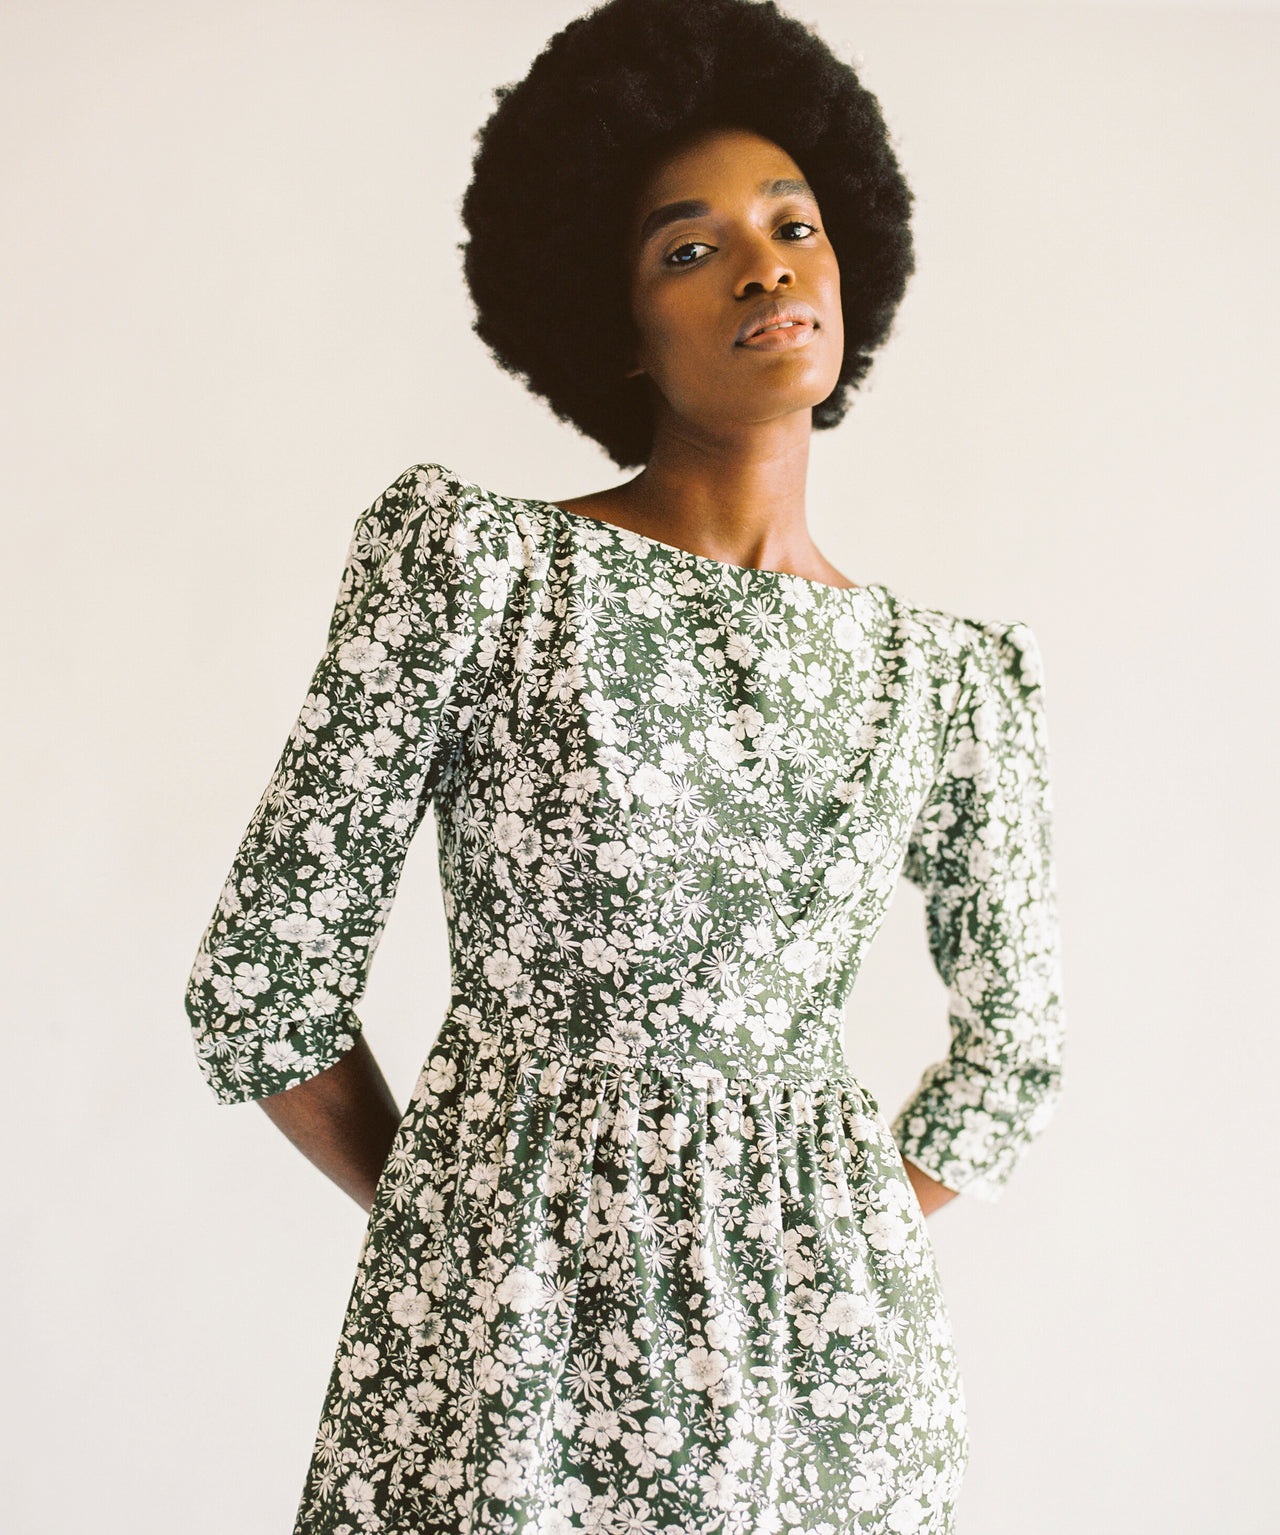 Anais Bateau Neck Dress with Corset Seam Details / Forest Green and Milky White Floral Cotton